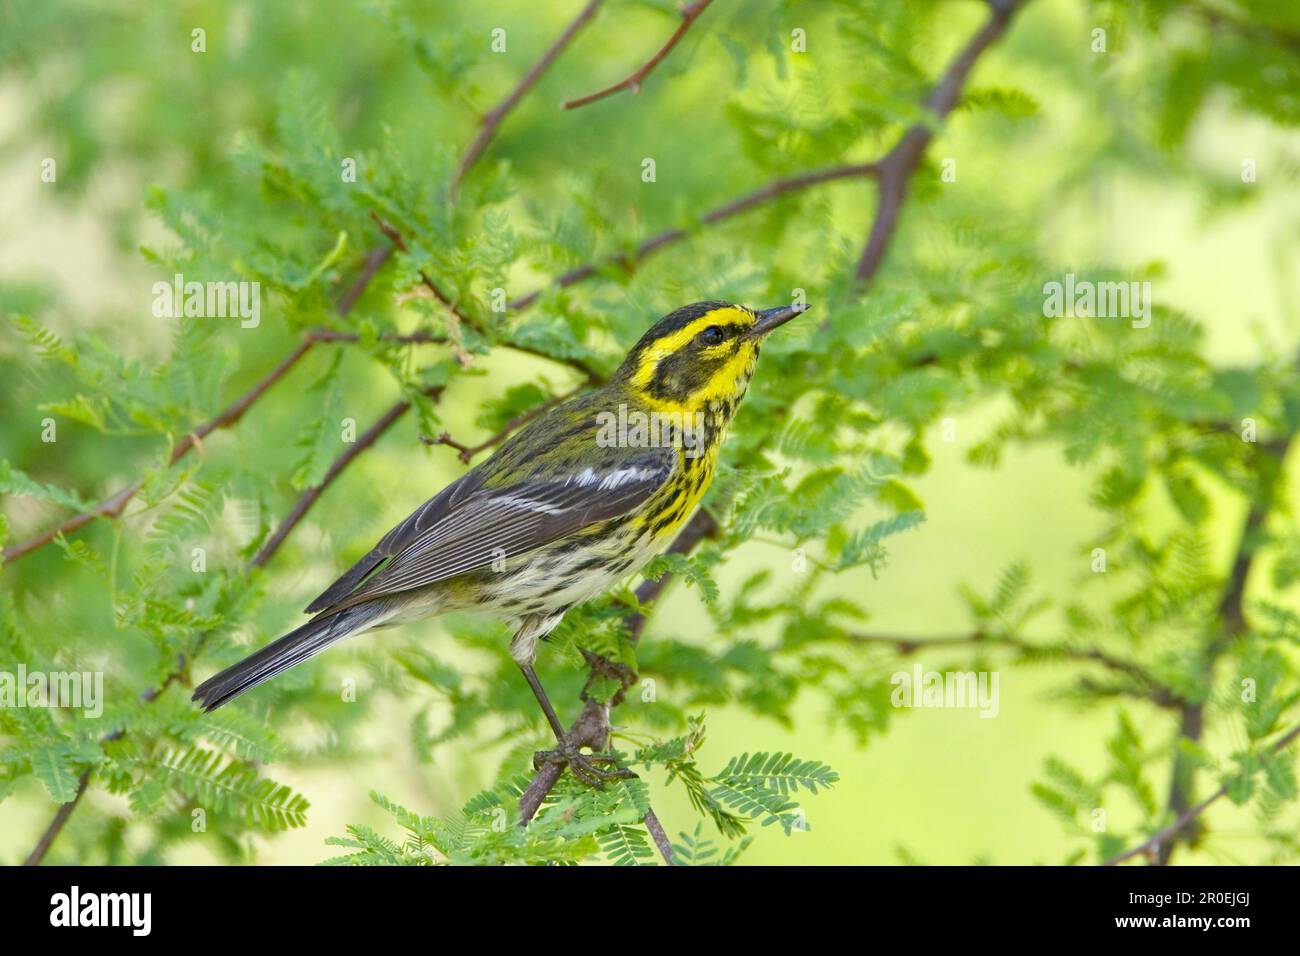 Townsend's Warbler (Dendroica townsendi) adult male, perched on twig, South Padre Island, Texas (U.) S. A Stock Photo